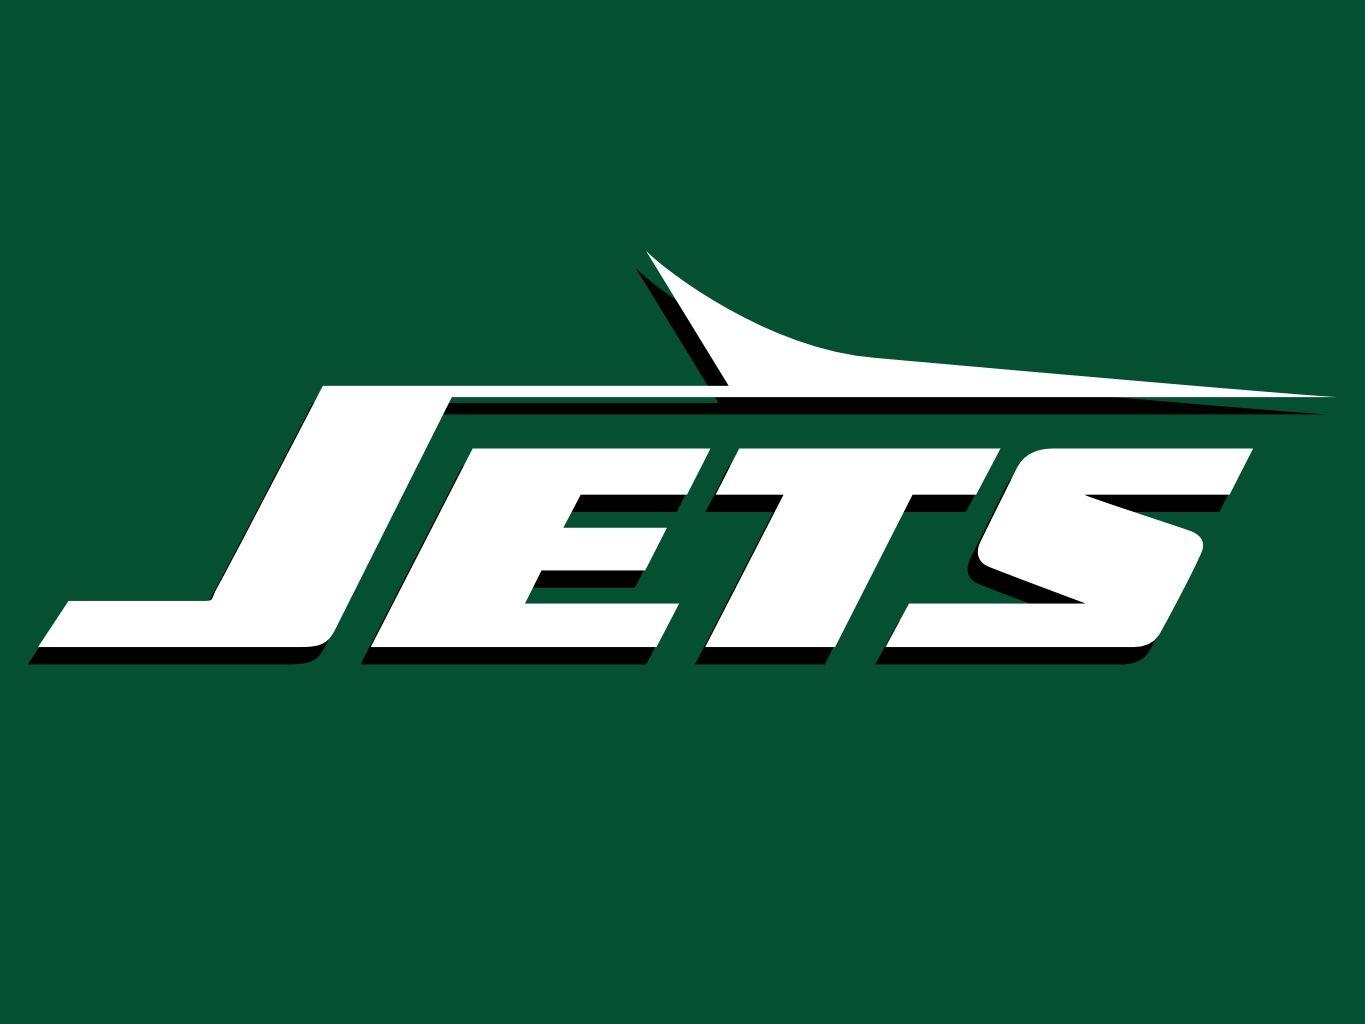 New York Jets New Logo - It's time for a logo and uniform change. York Jets Message